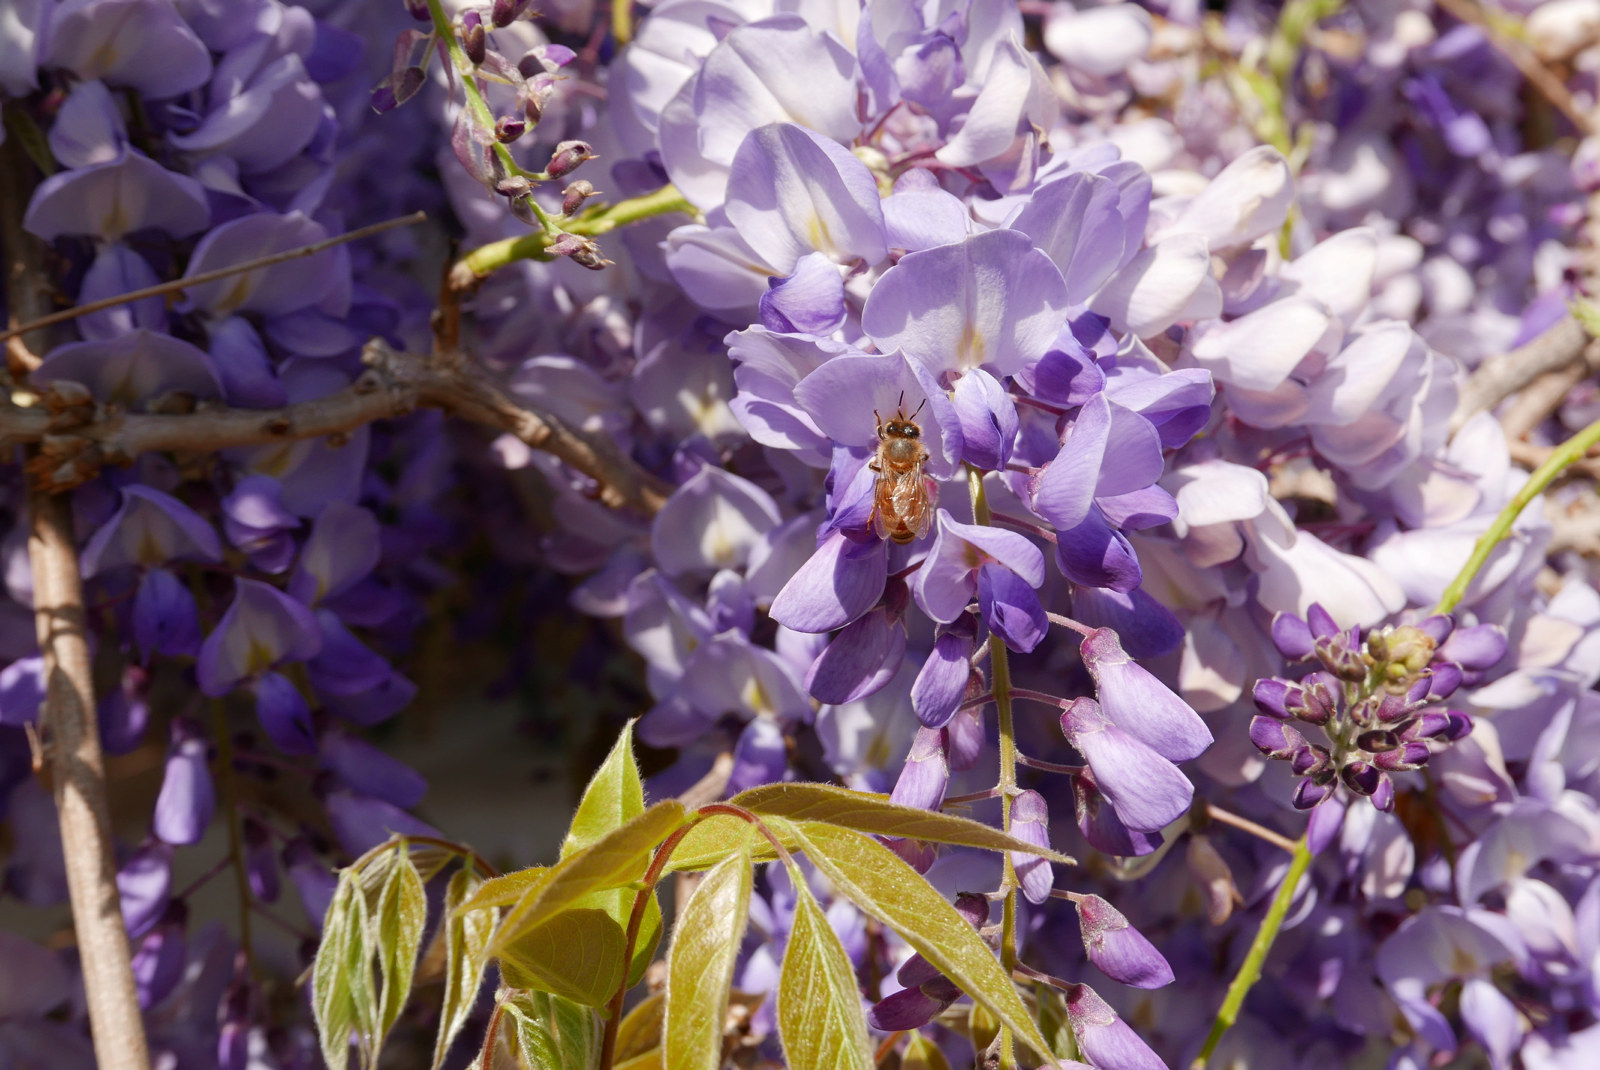 A European honey bee collects pollen from the wisteria at Vaucluse House